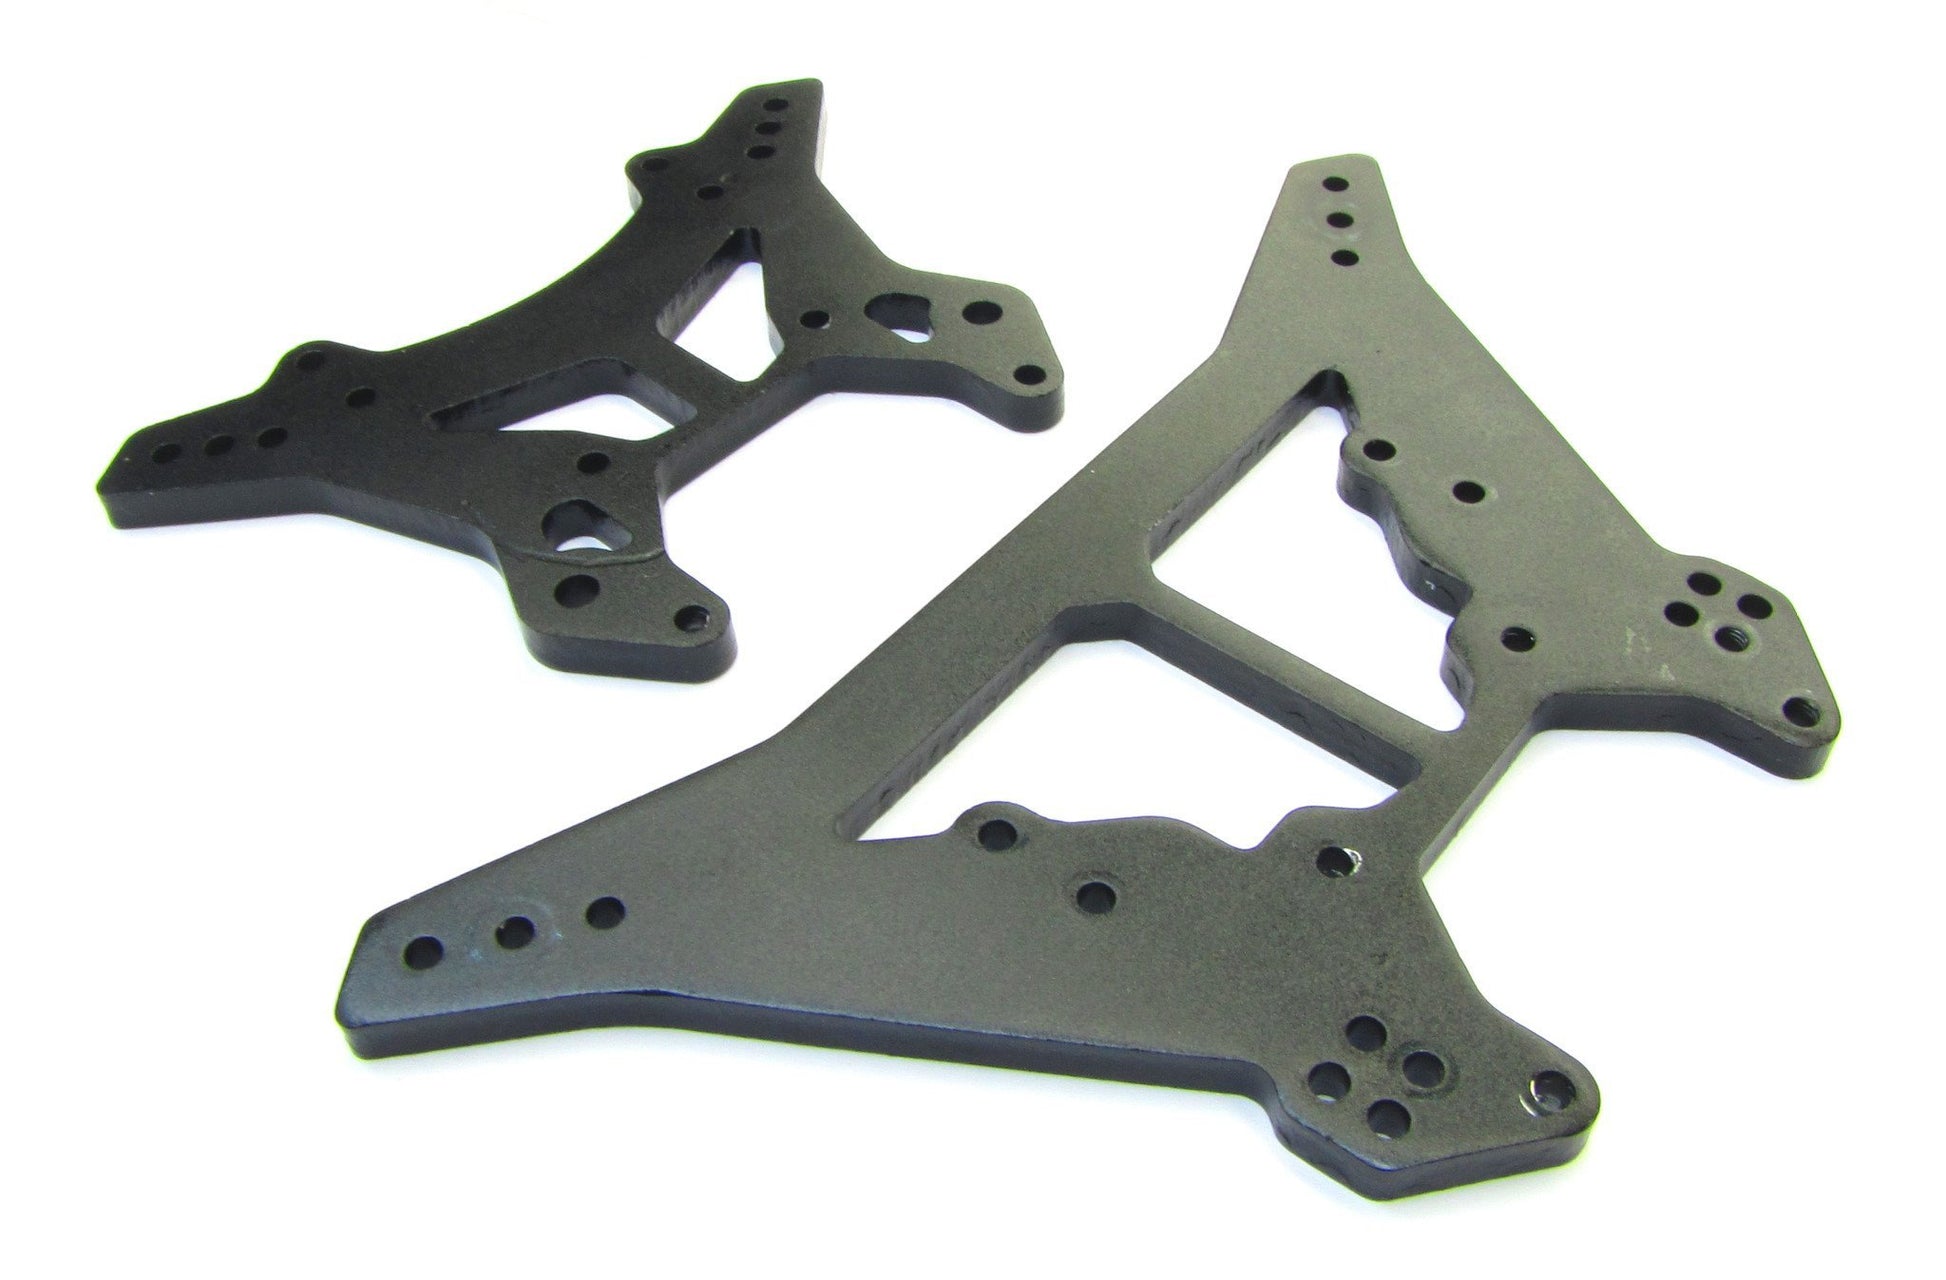 Arrma KRATON 6s BLX - Towers (V4) Front/Rear Shock Tower aluminum anodized ar106040 - Dirt Cheap RC SAVING YOU MONEY, ONE PART AT A TIME